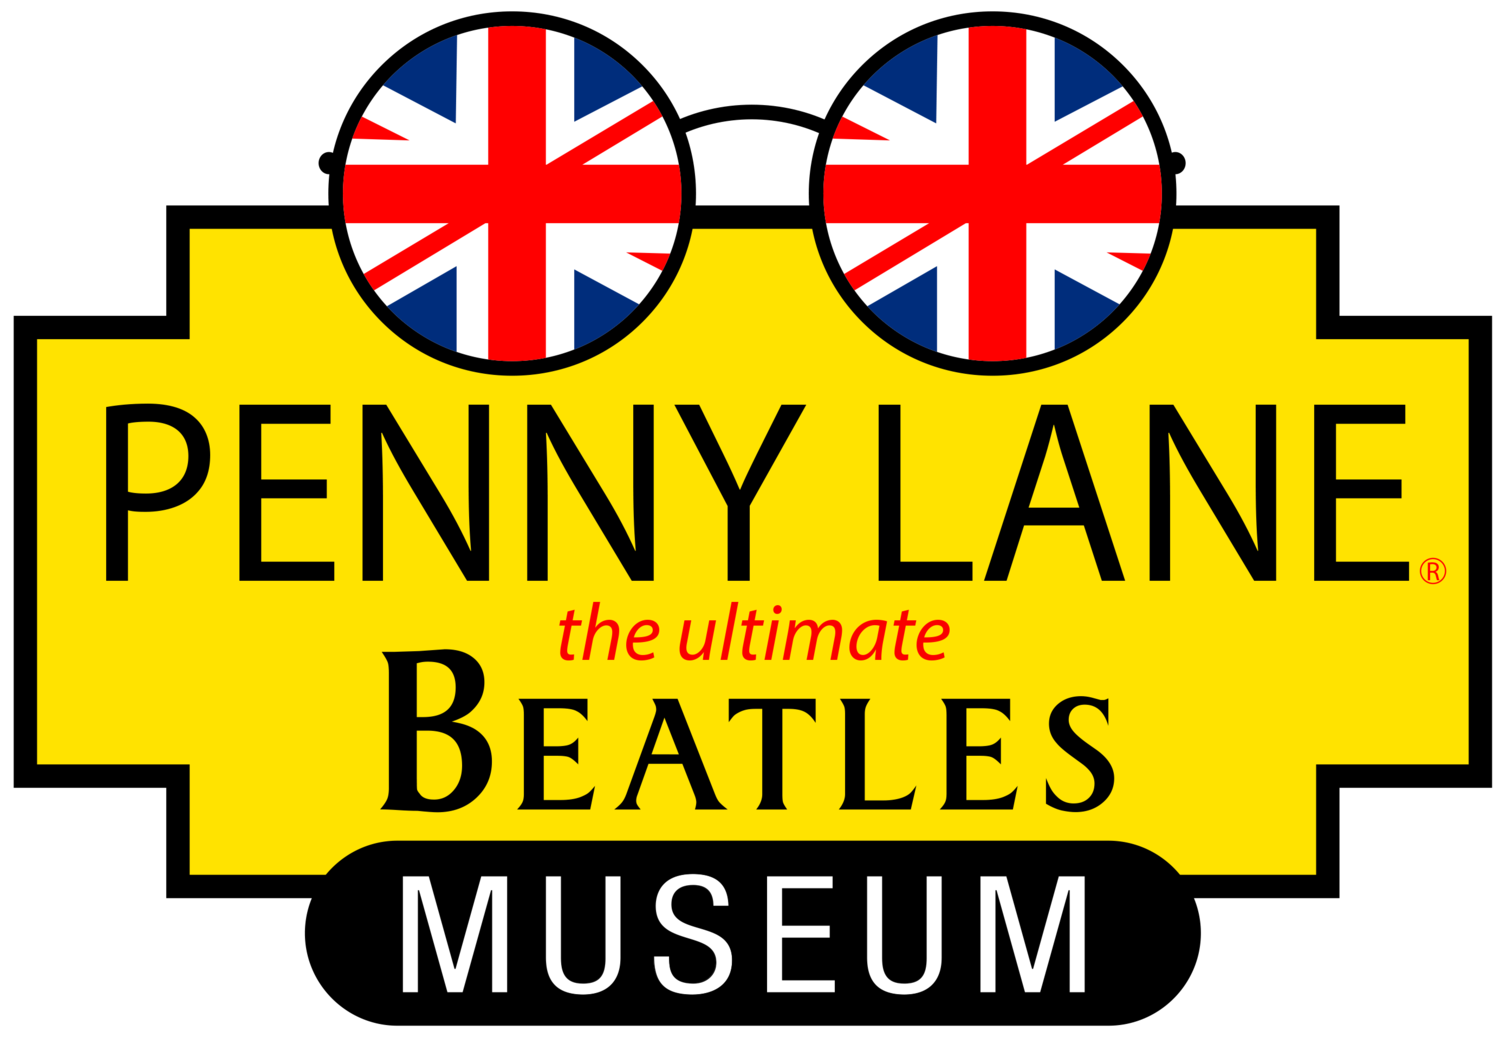 Penny Lane, the ultimate Beatle Museum